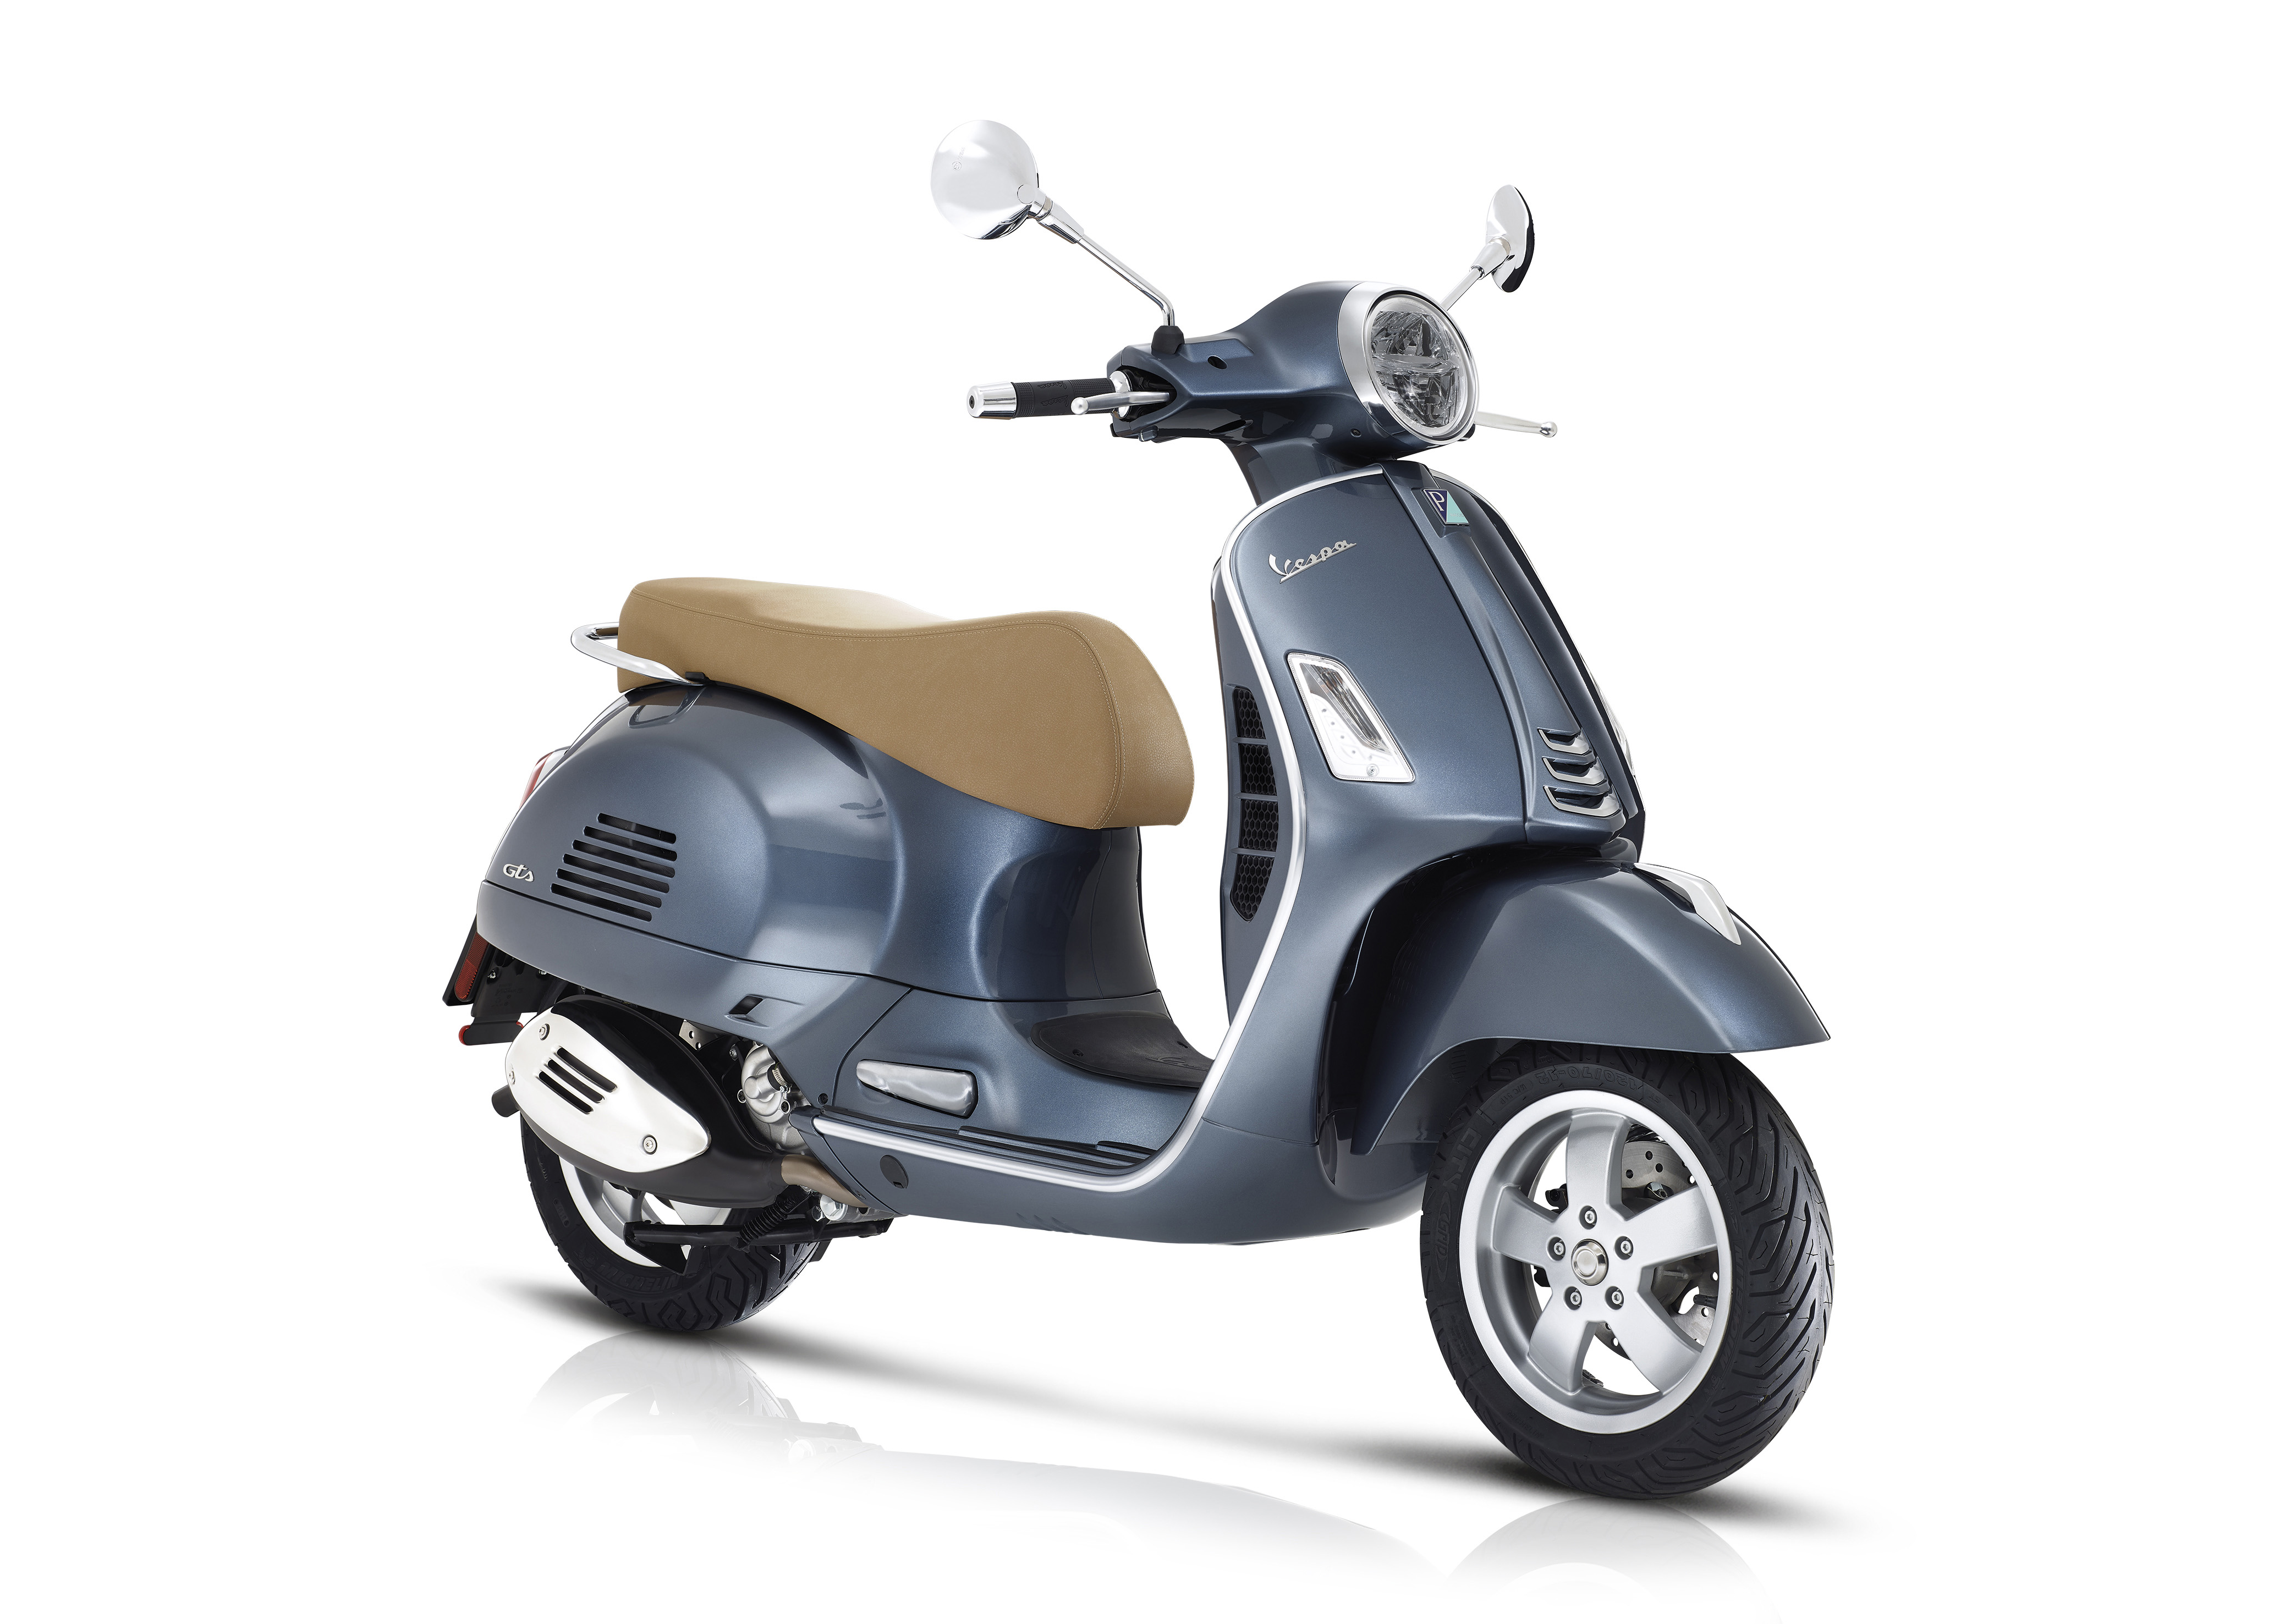 matematiker afrikansk Snuble 2020 Vespa GTS 300 Buyer's Guide: Specs, Photos, Price | Cycle World